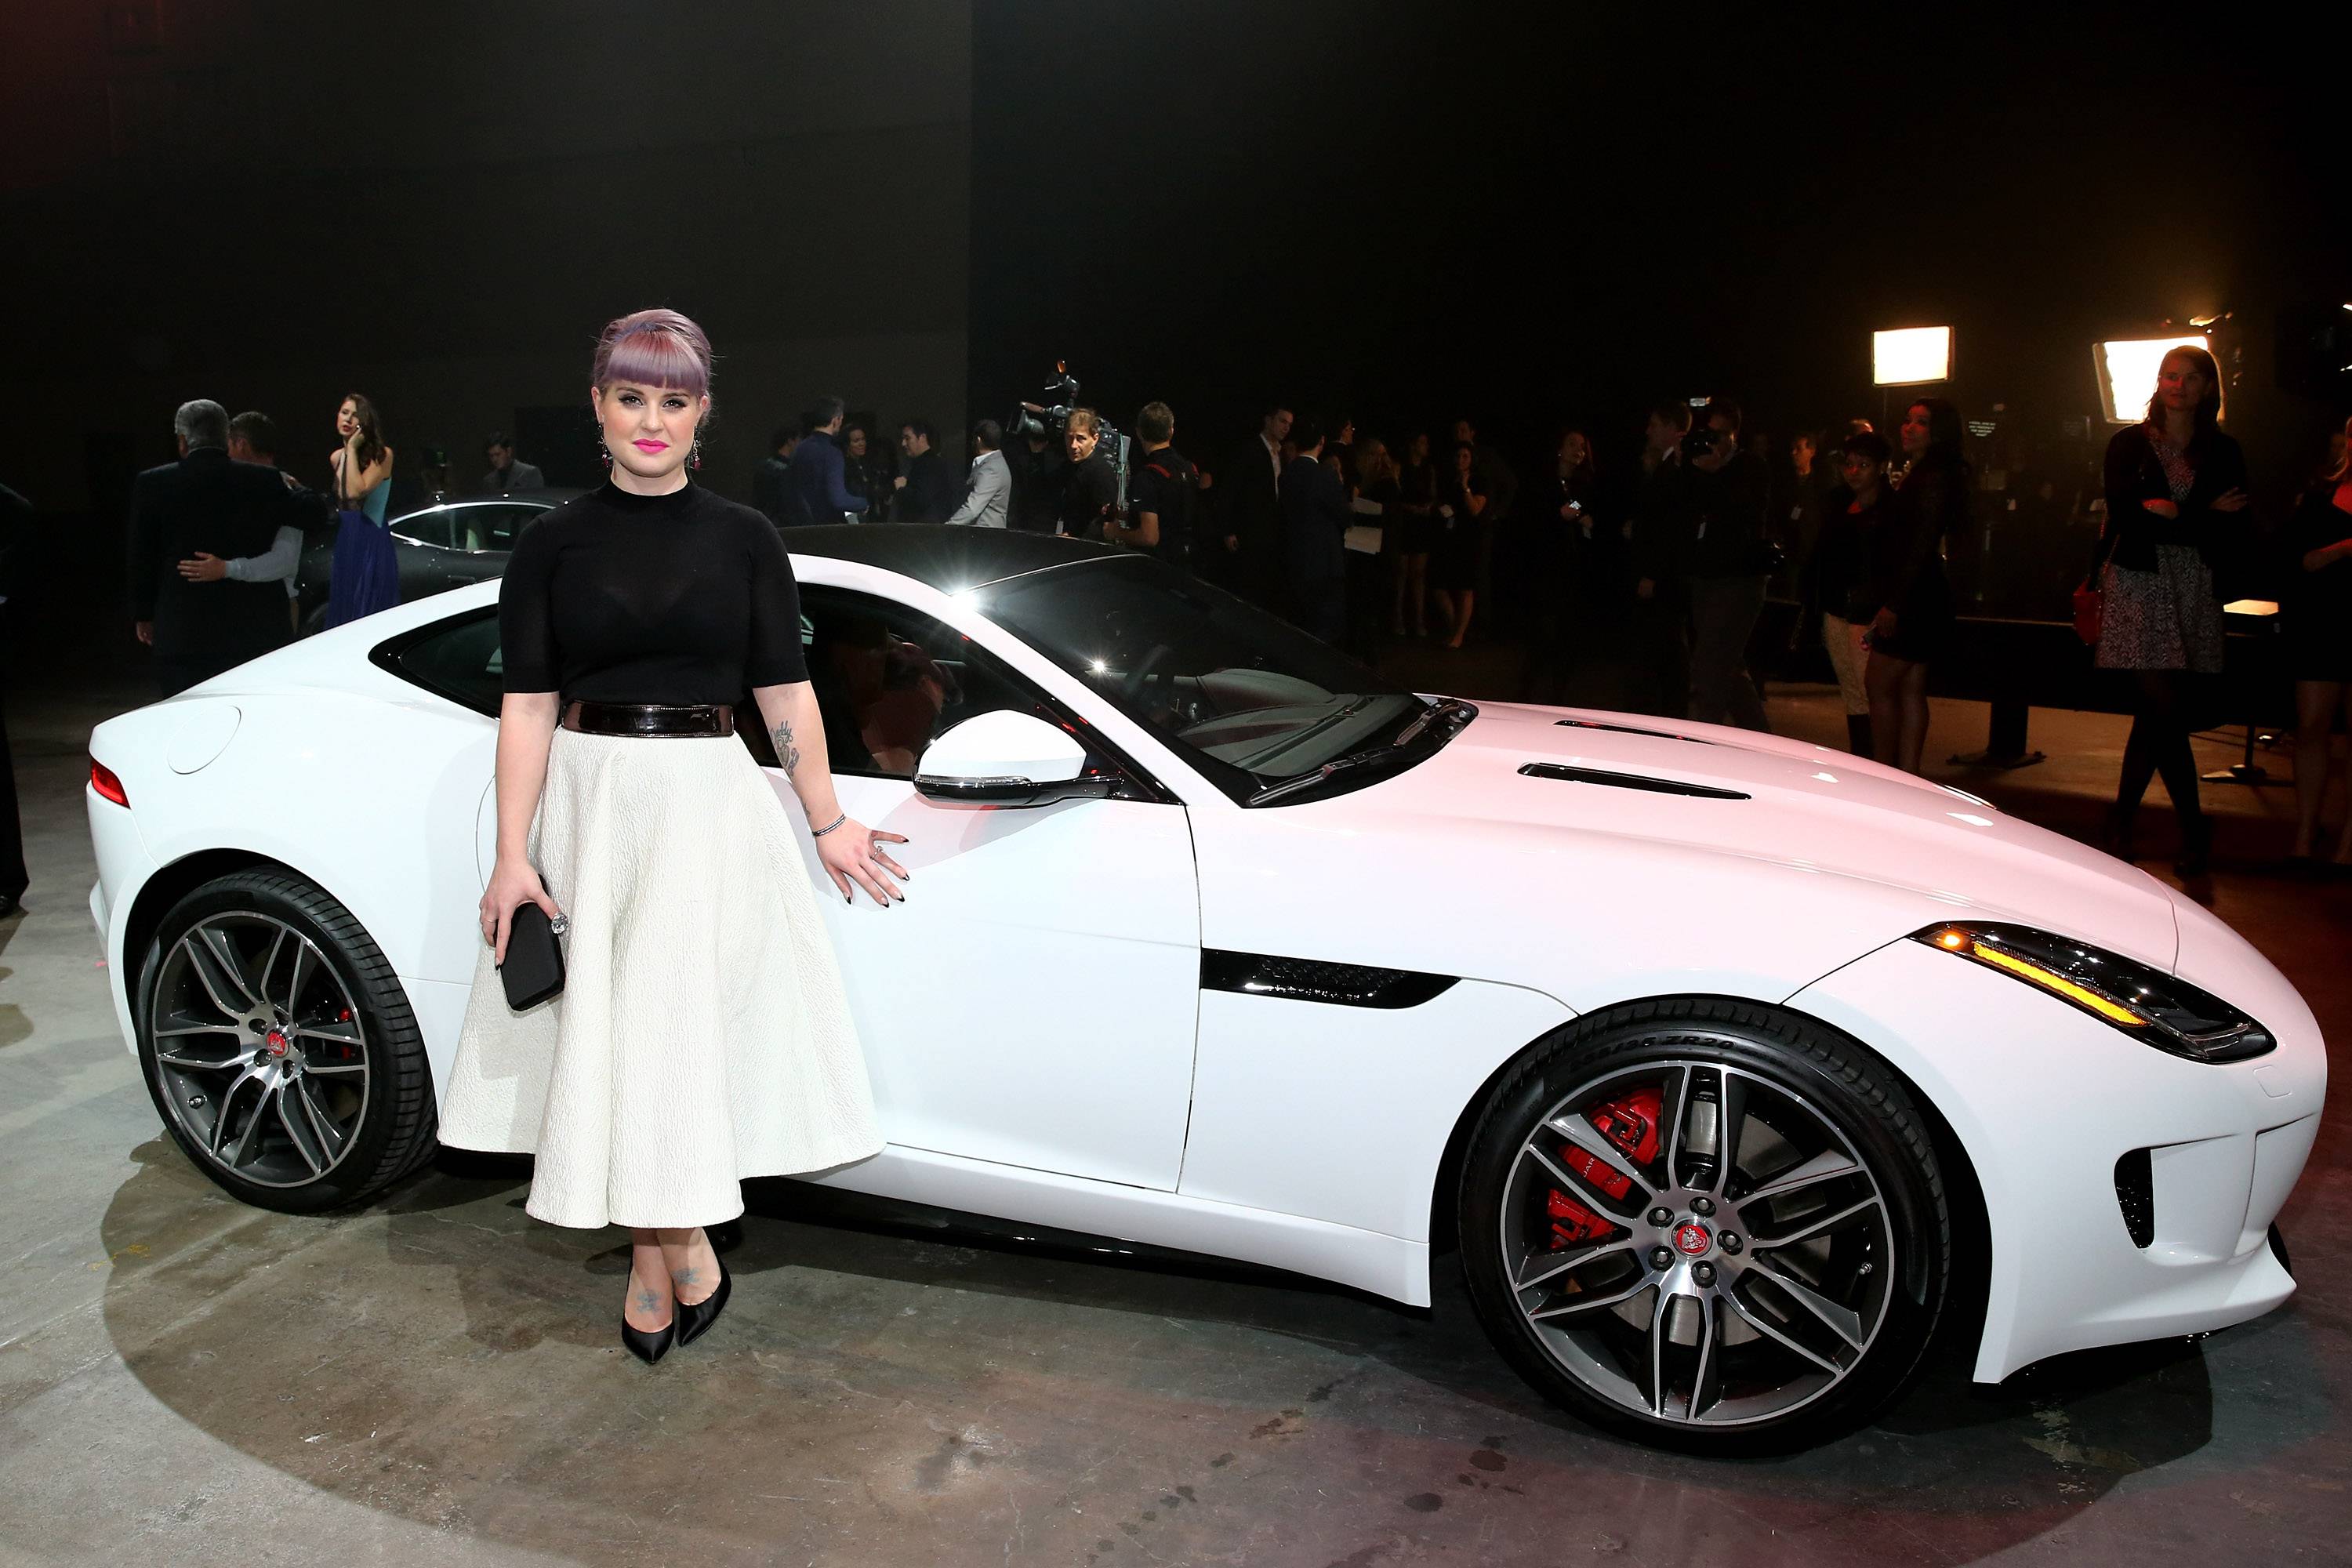 The All New Jaguar F-TYPE Coupe Makes High-Speed Debut At Exclusive VIP Event In LA